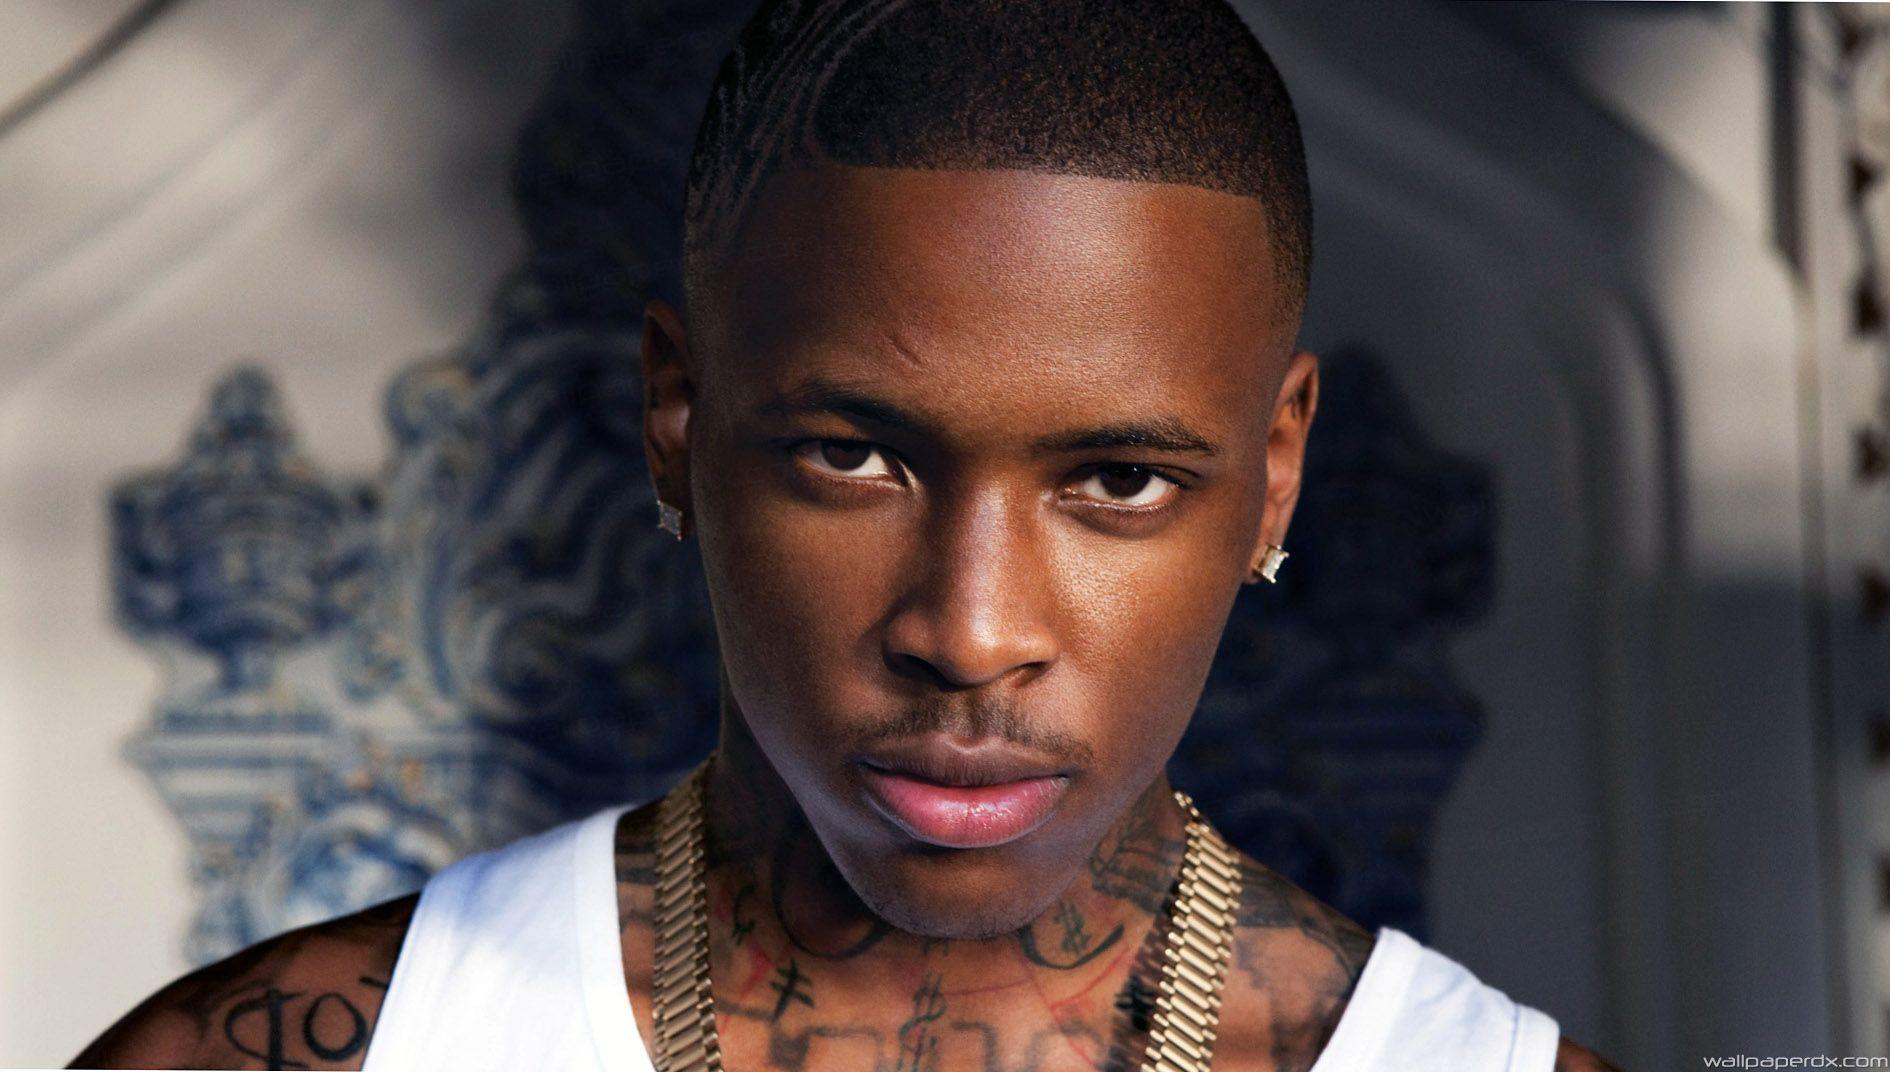  YG  the Rapper Wallpapers  Top Free YG  the Rapper 